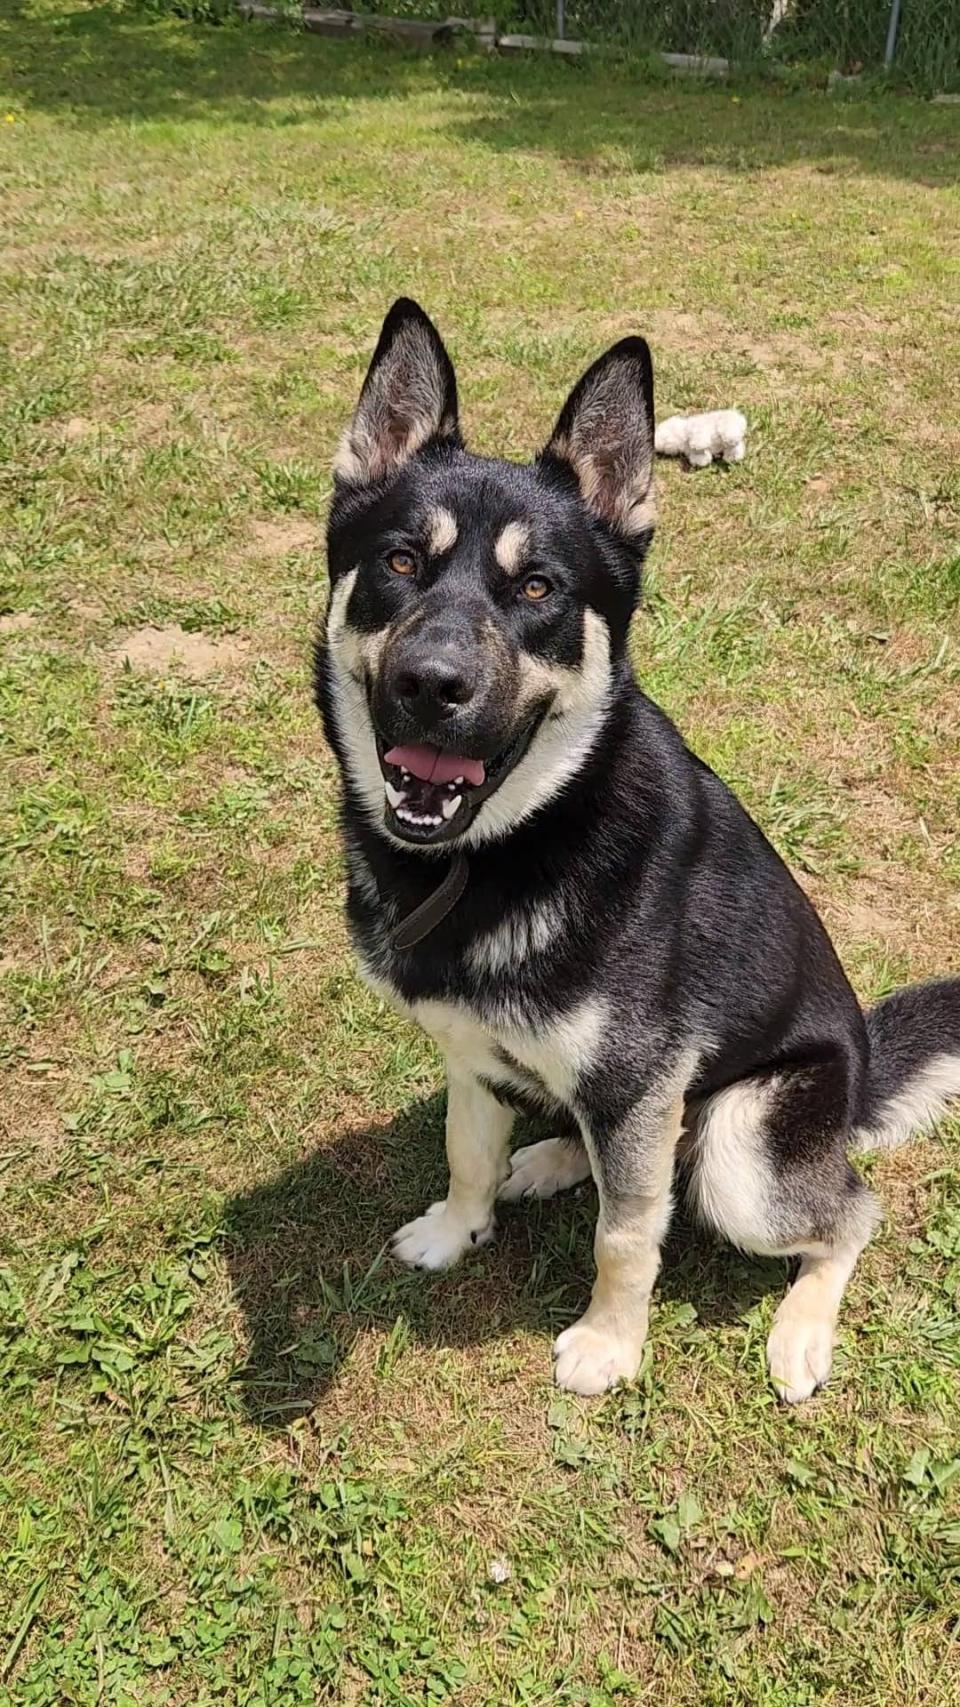 According to outgoing director Angela Davis, the Madison County Animal Services shelter has 18 dog kennels. One of the dogs currently housed at the shelter is Colby, a German Shepherd/husky mix.